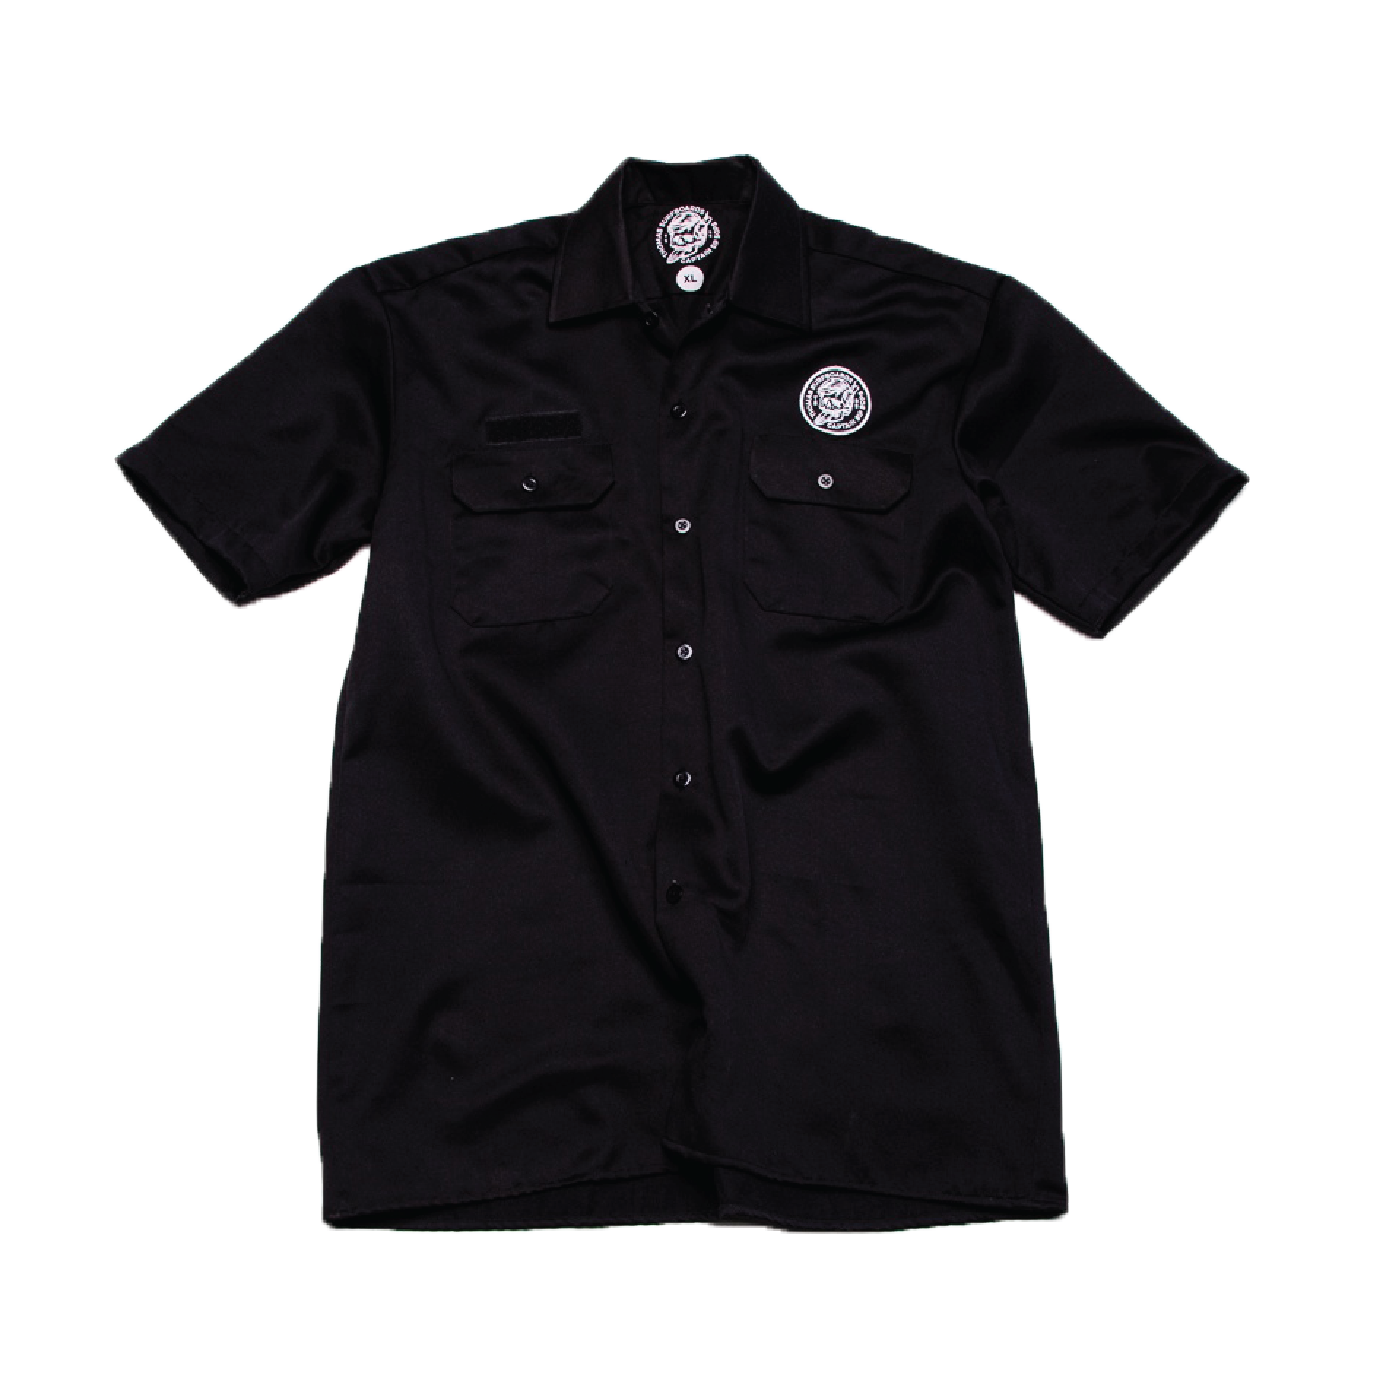 Thomas Surfboards & Captain Sip Sops Colab Stay Bold Work Shirt Black